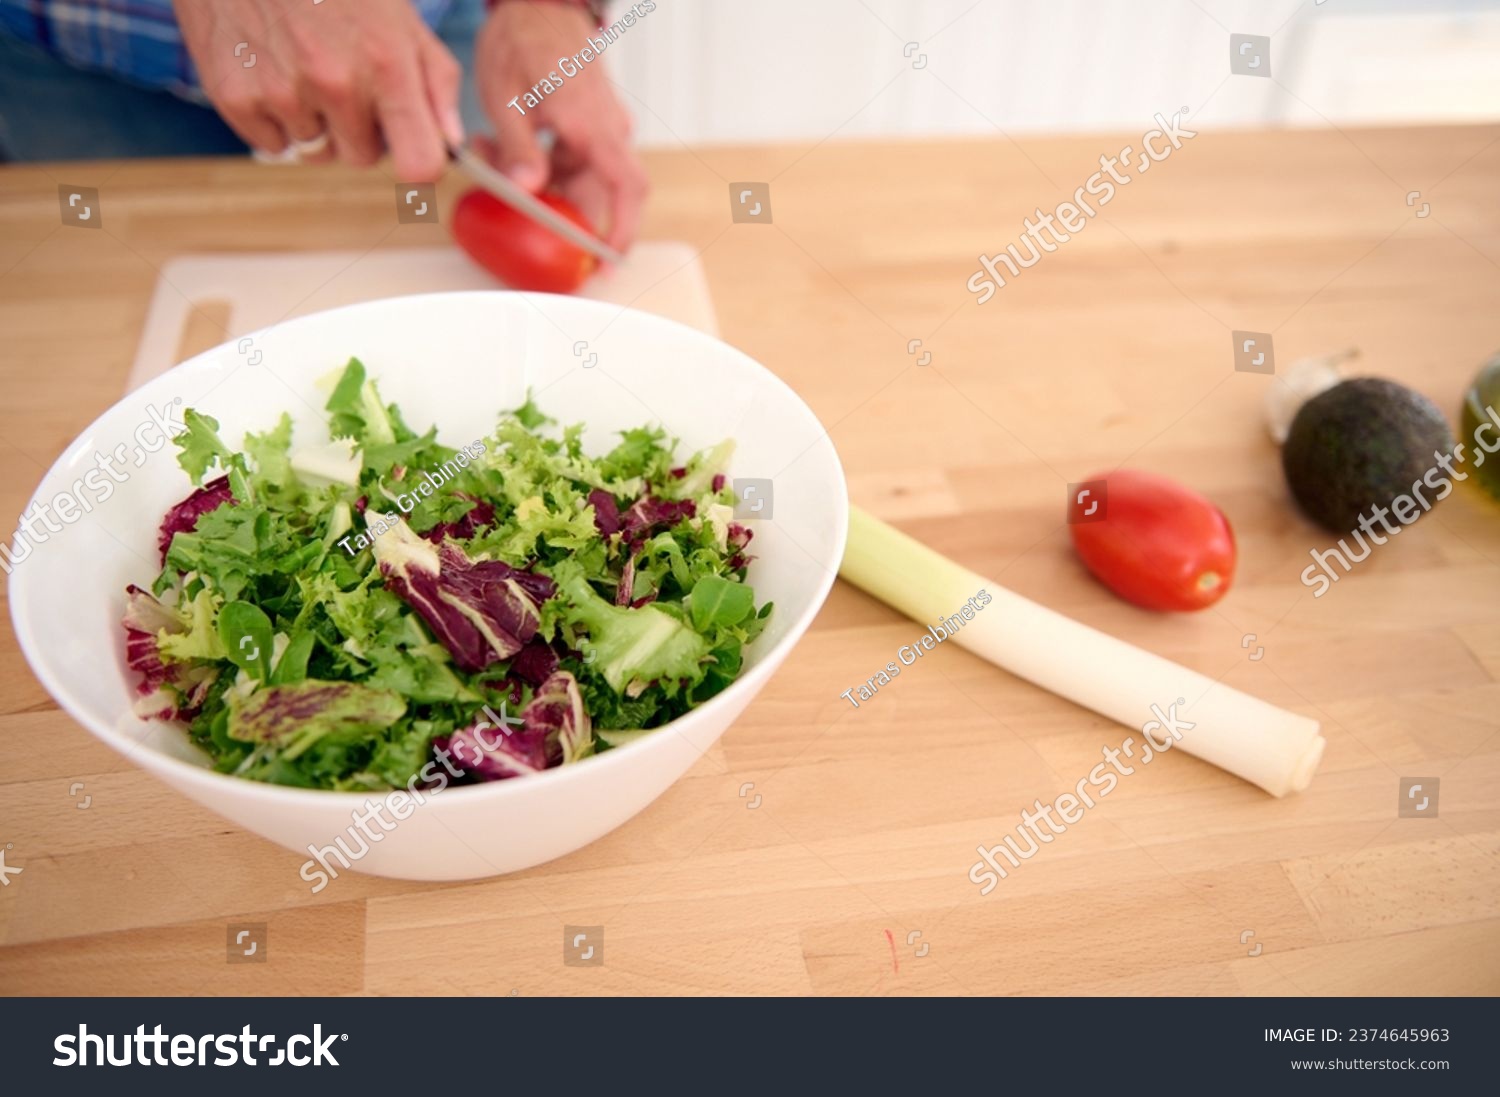 Close-up hands of a male chef chopping ripe organic tomatoes while preparing a delicious healthy salad from fresh vegetables and herbs. People. Food. Healthy eating, alimentation and dieting concept #2374645963